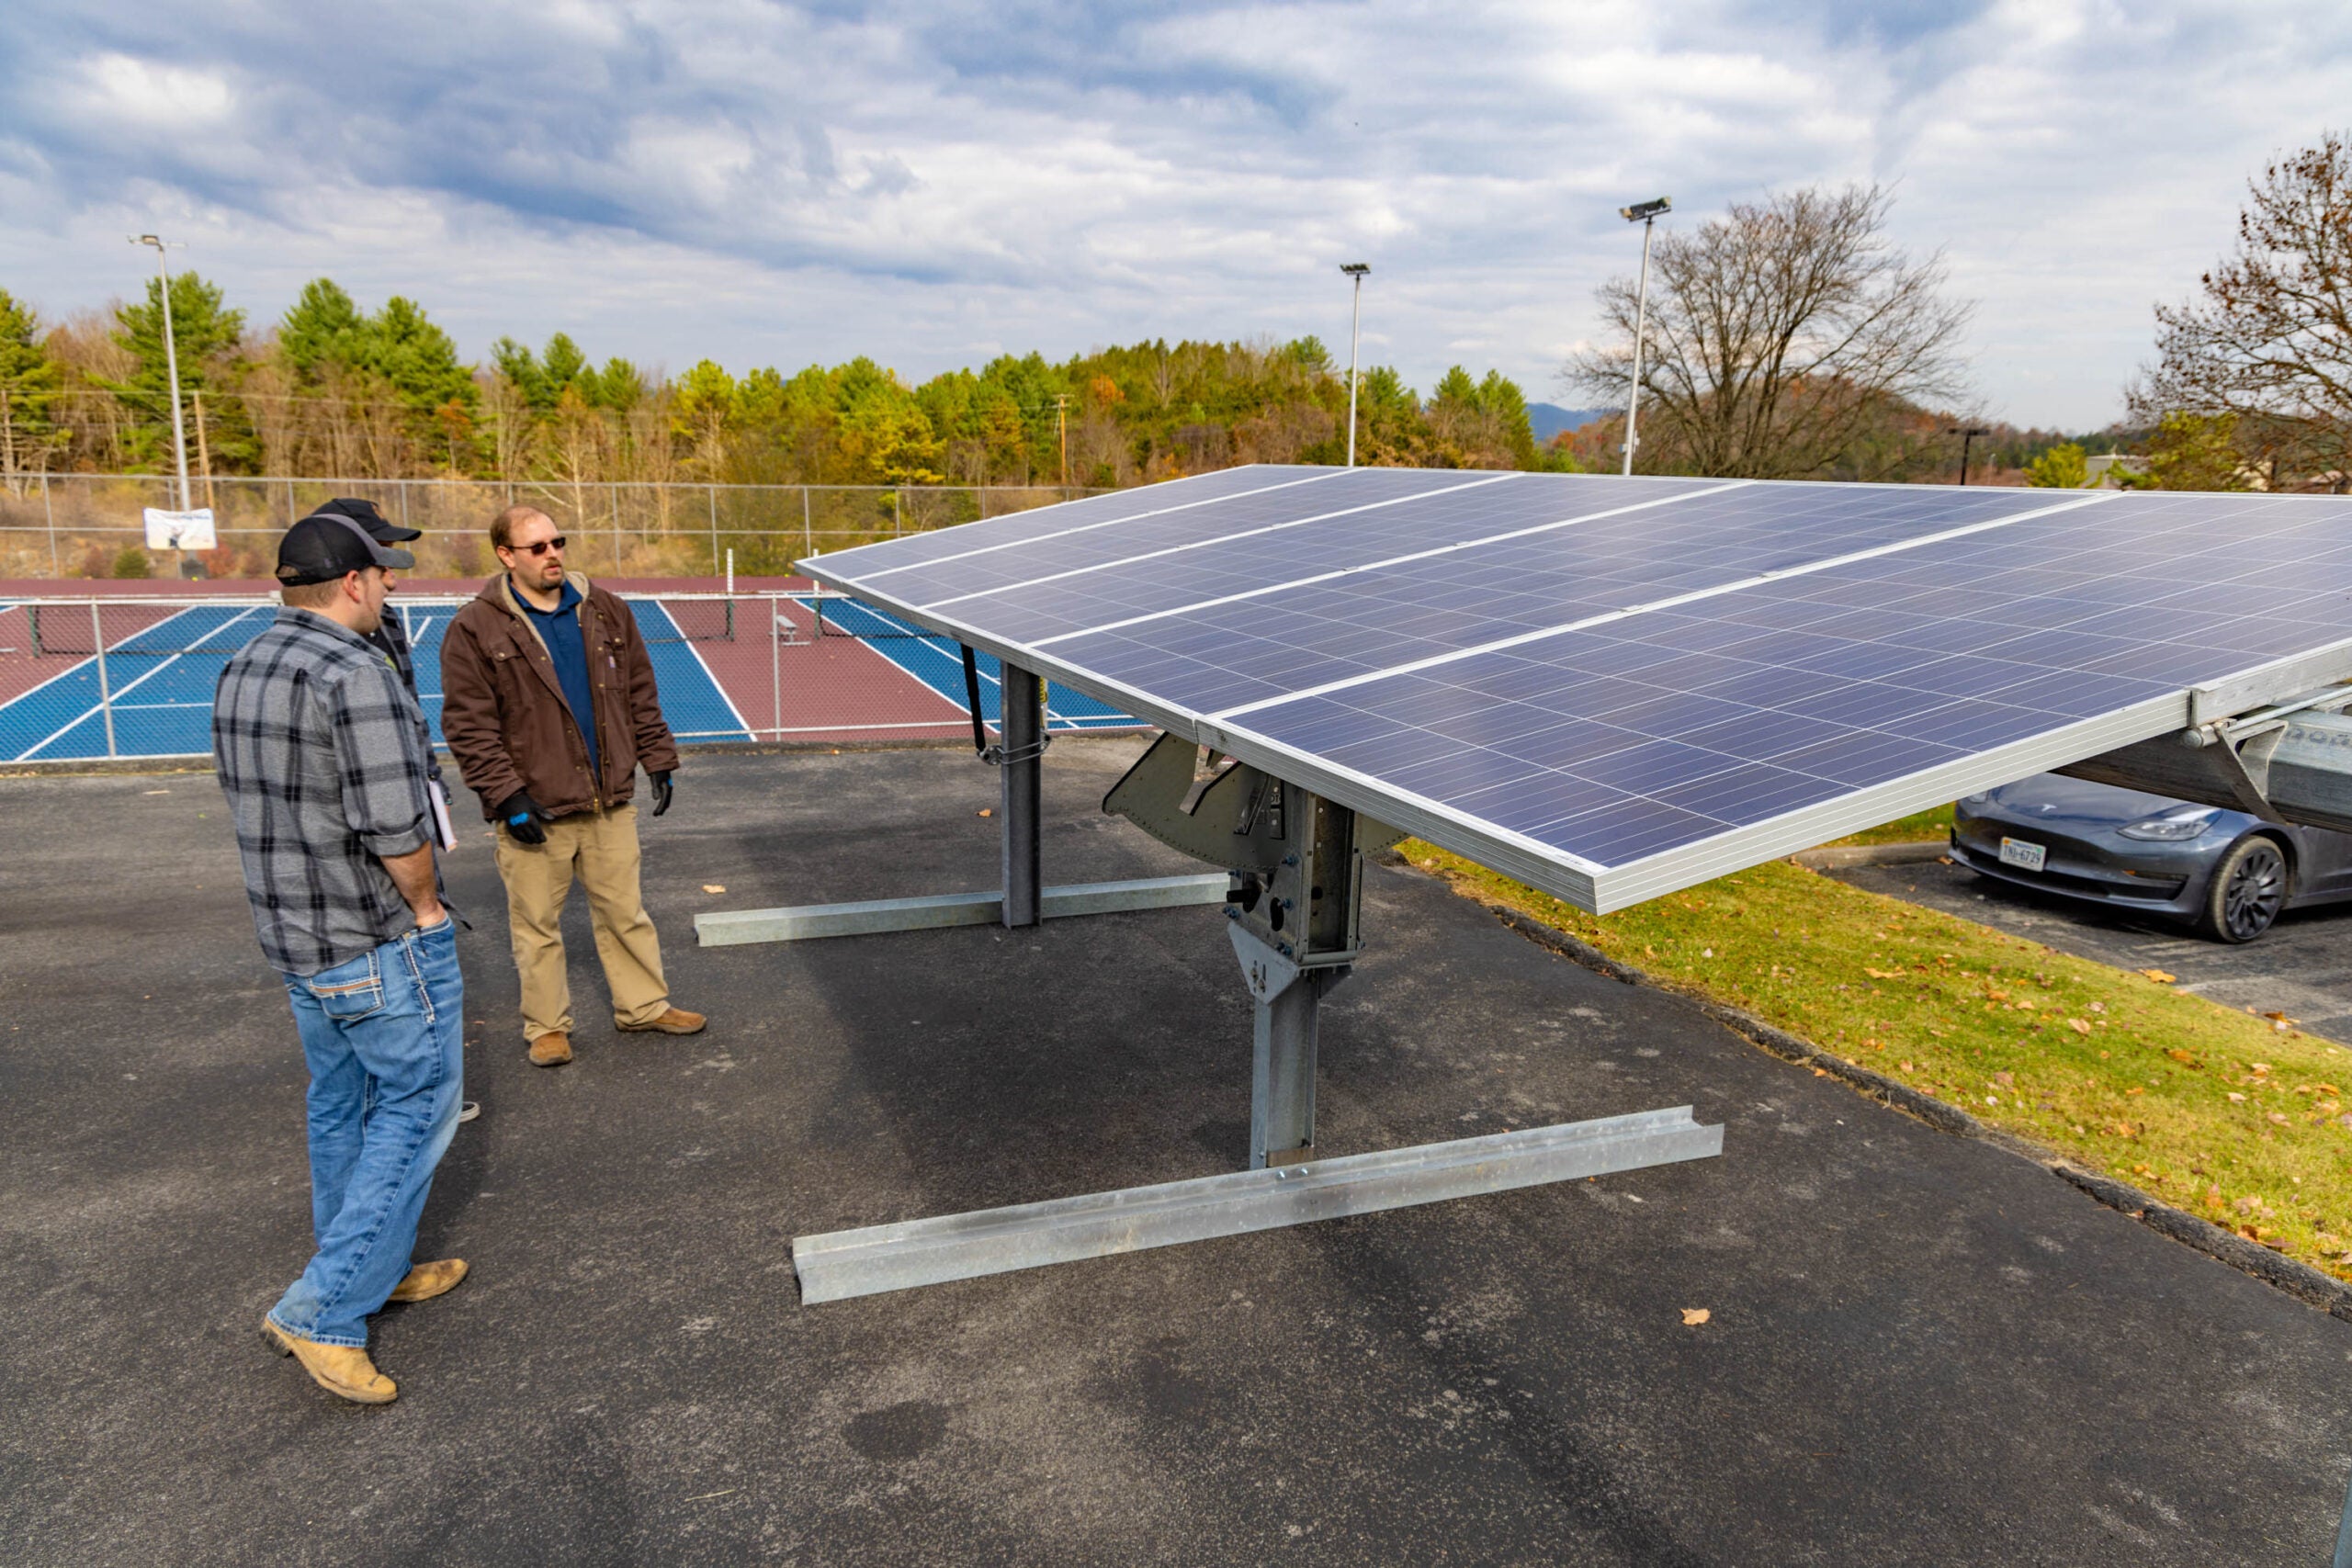 Faculty and students look at portable solar trainer.